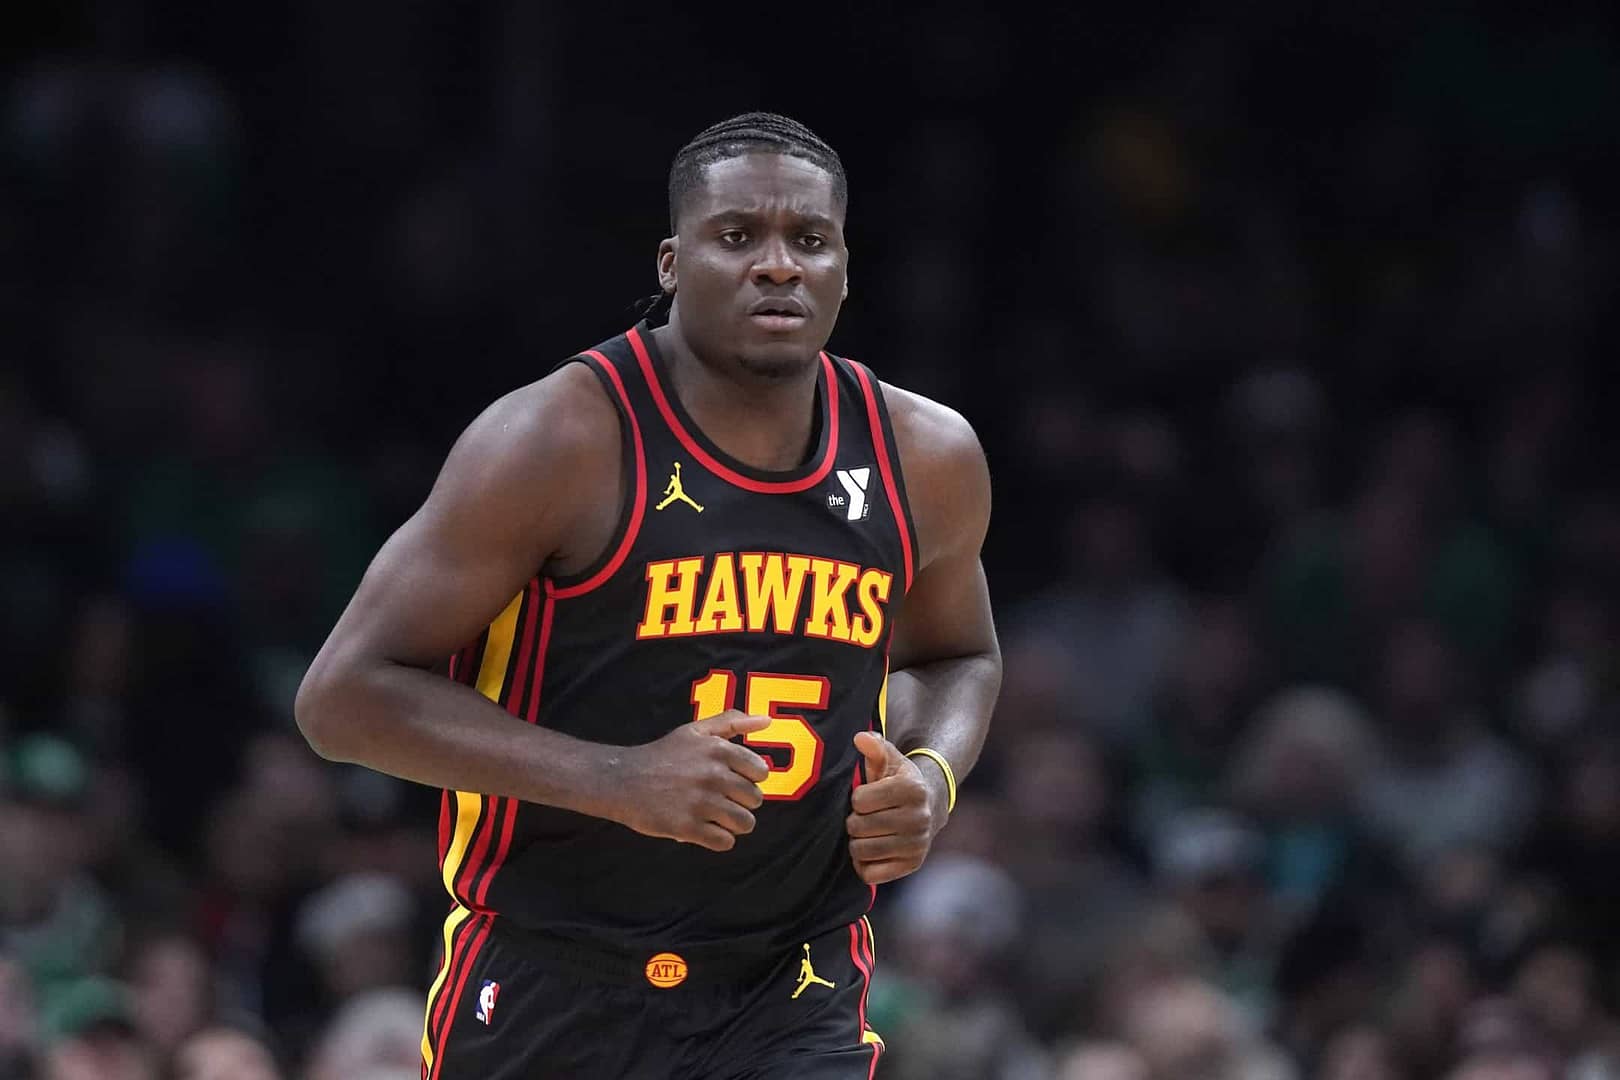 Josh Engleman provides his PrizePicks expert picks & predictions, including a look at how Clint Capela just won't be able to...